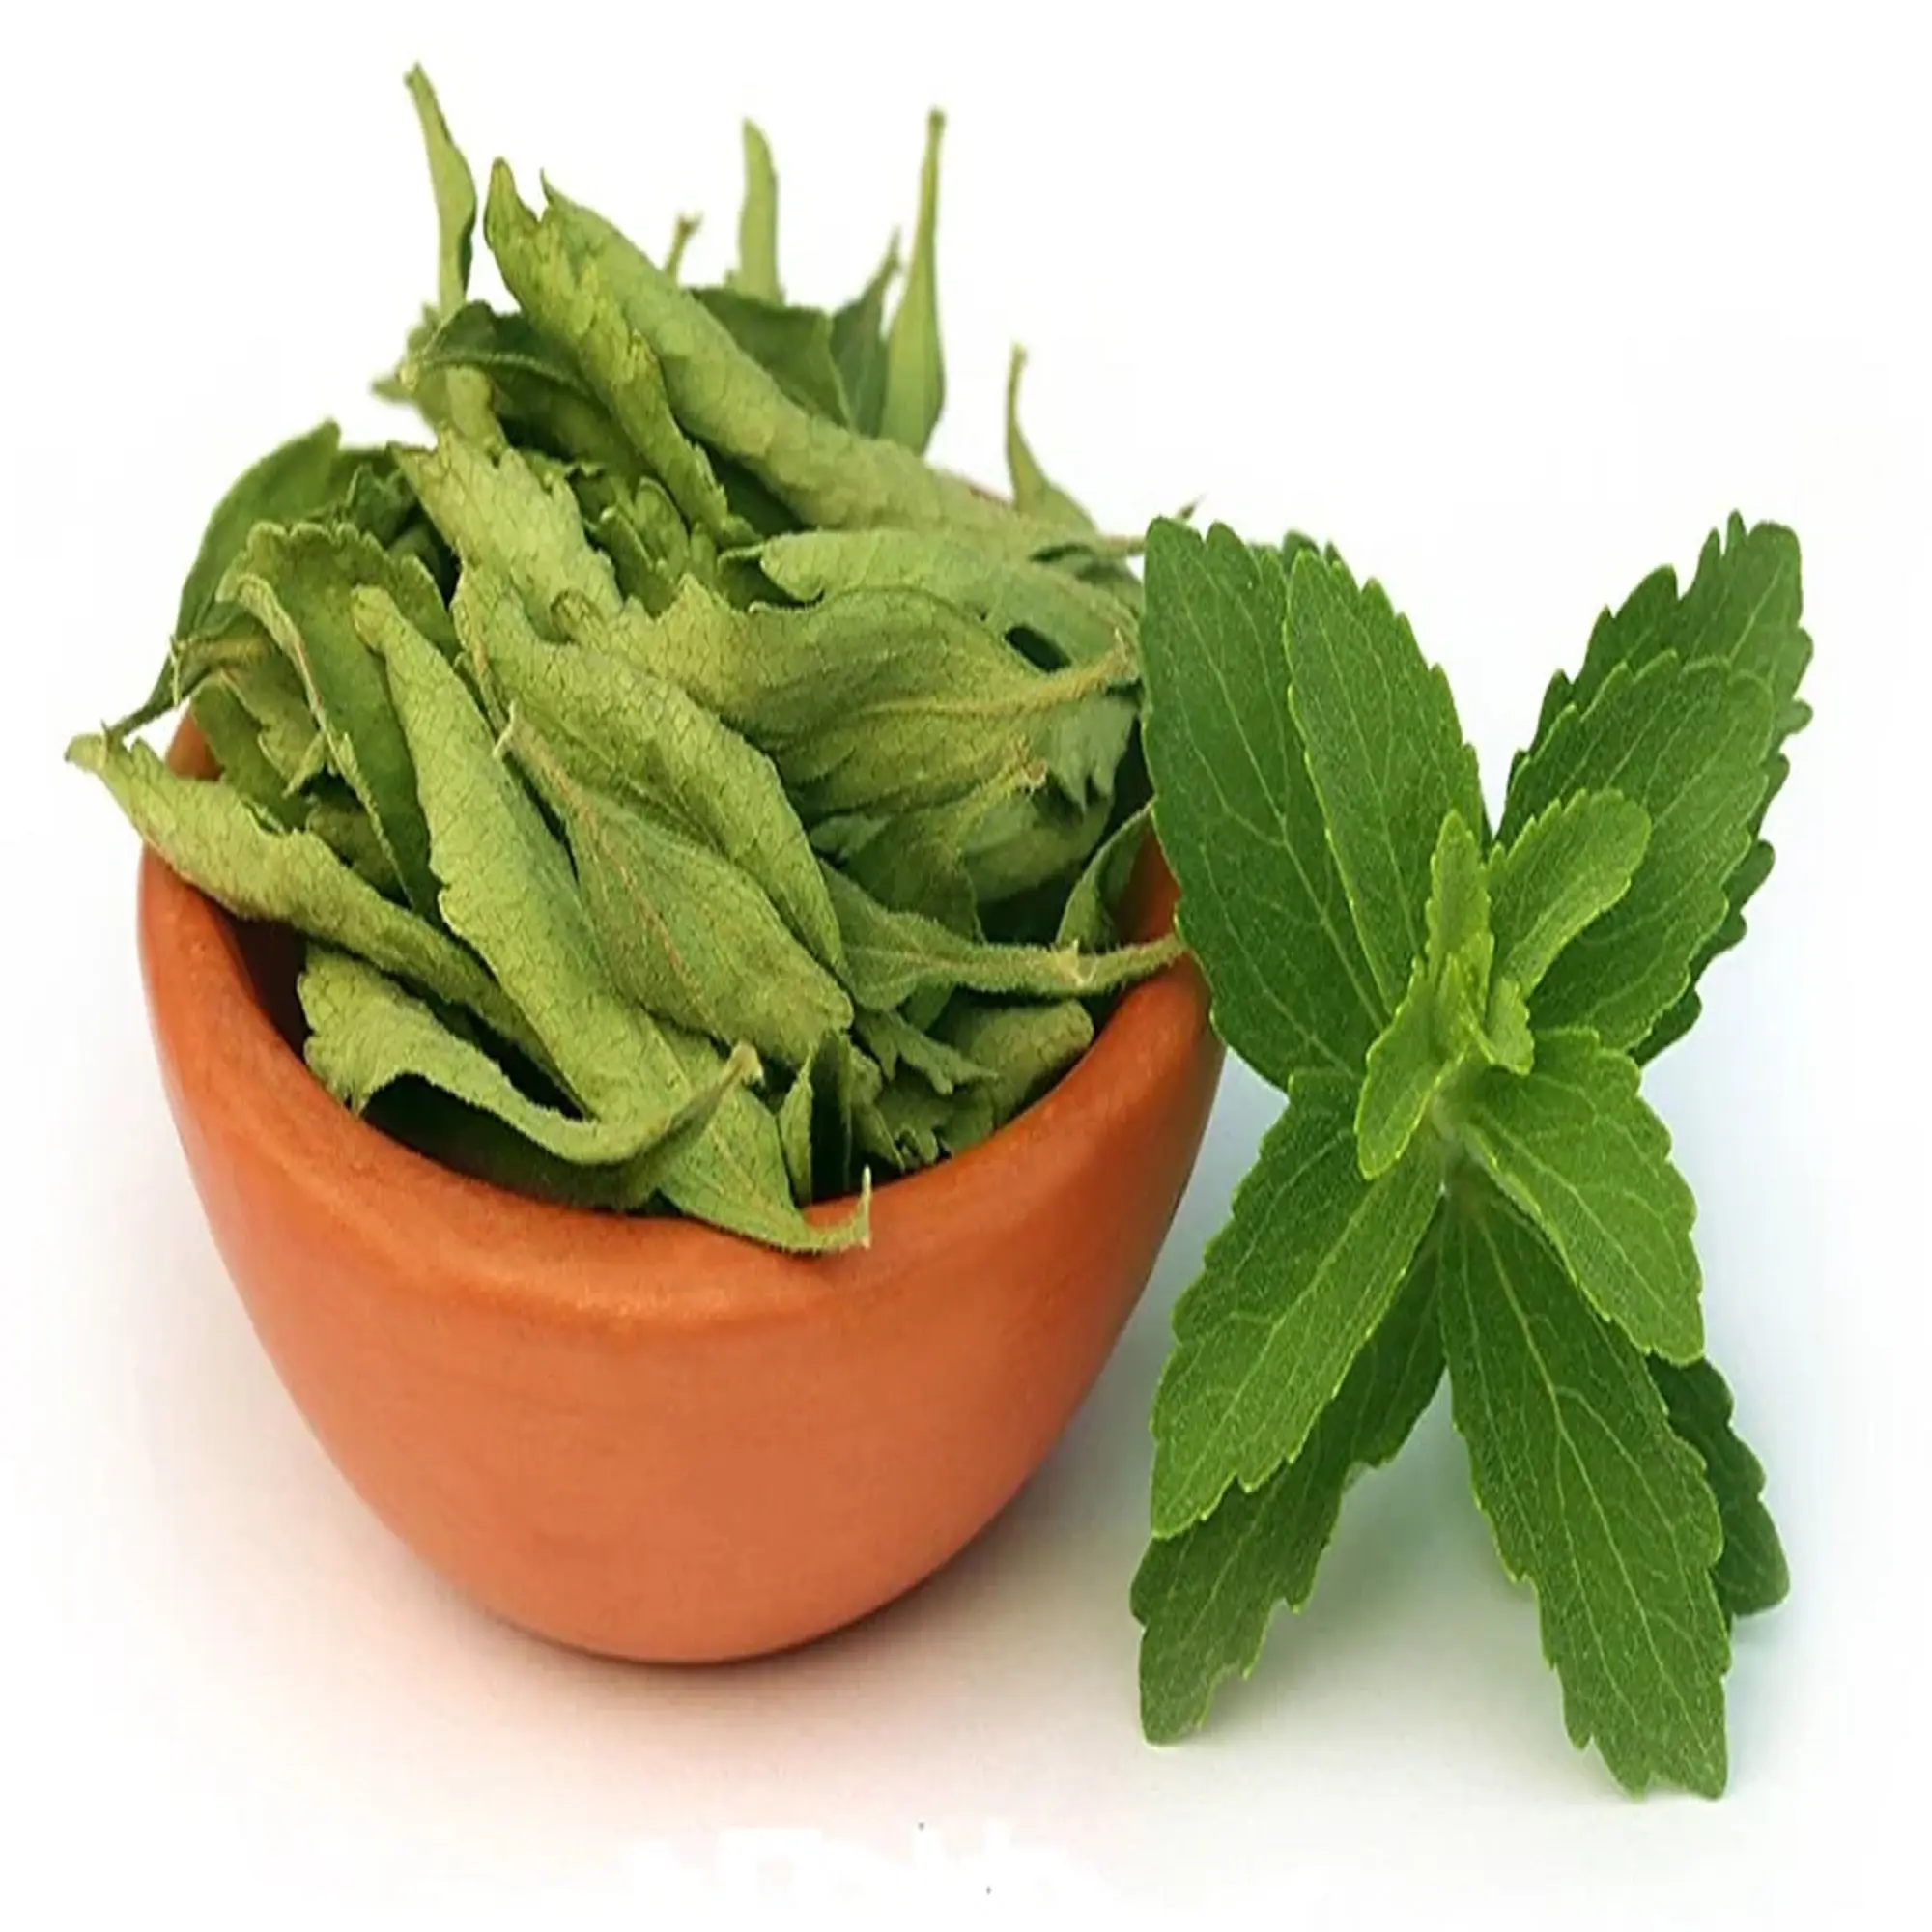 Supplier Best Bulk Price 25kg Dry Leaf Stevia Leaves Available For Wholesale And Export Private Labelling Available